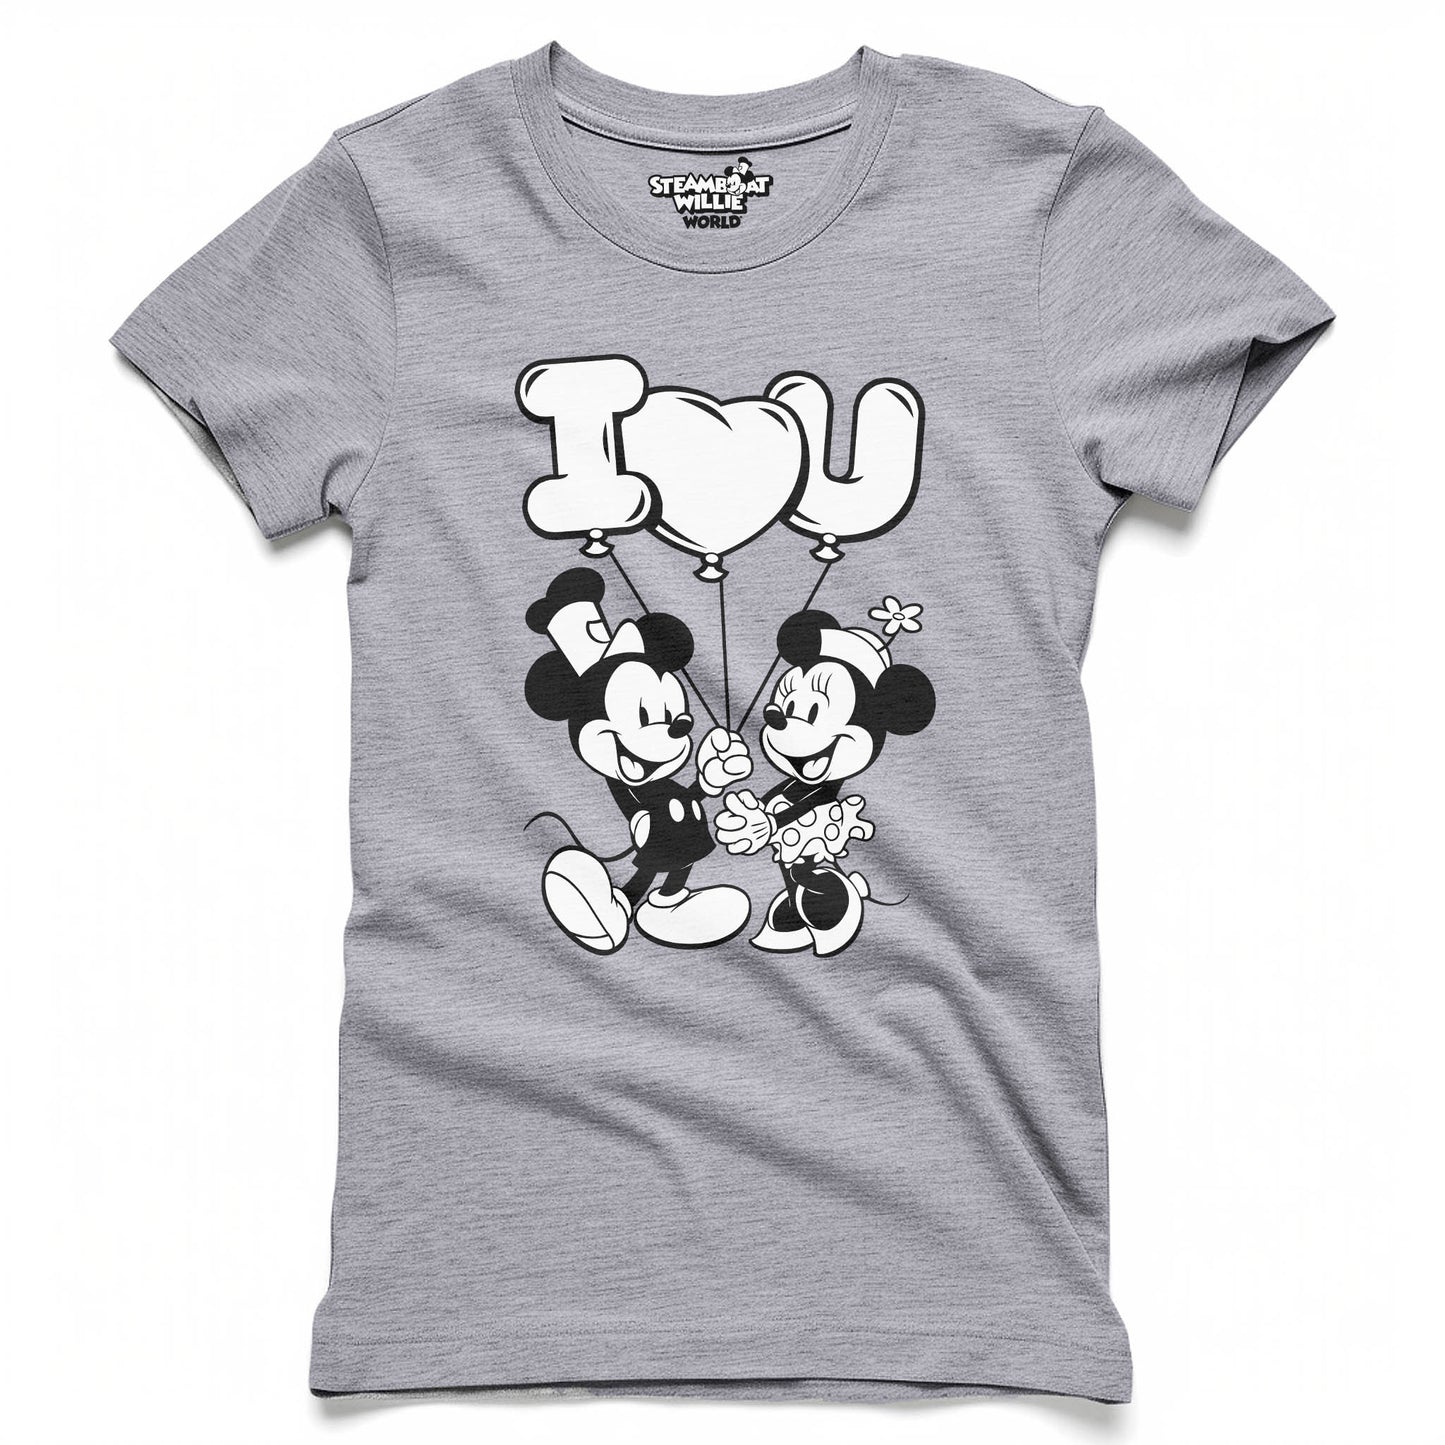 I Heart You! Women's Fitted Tee - Steamboat Willie World